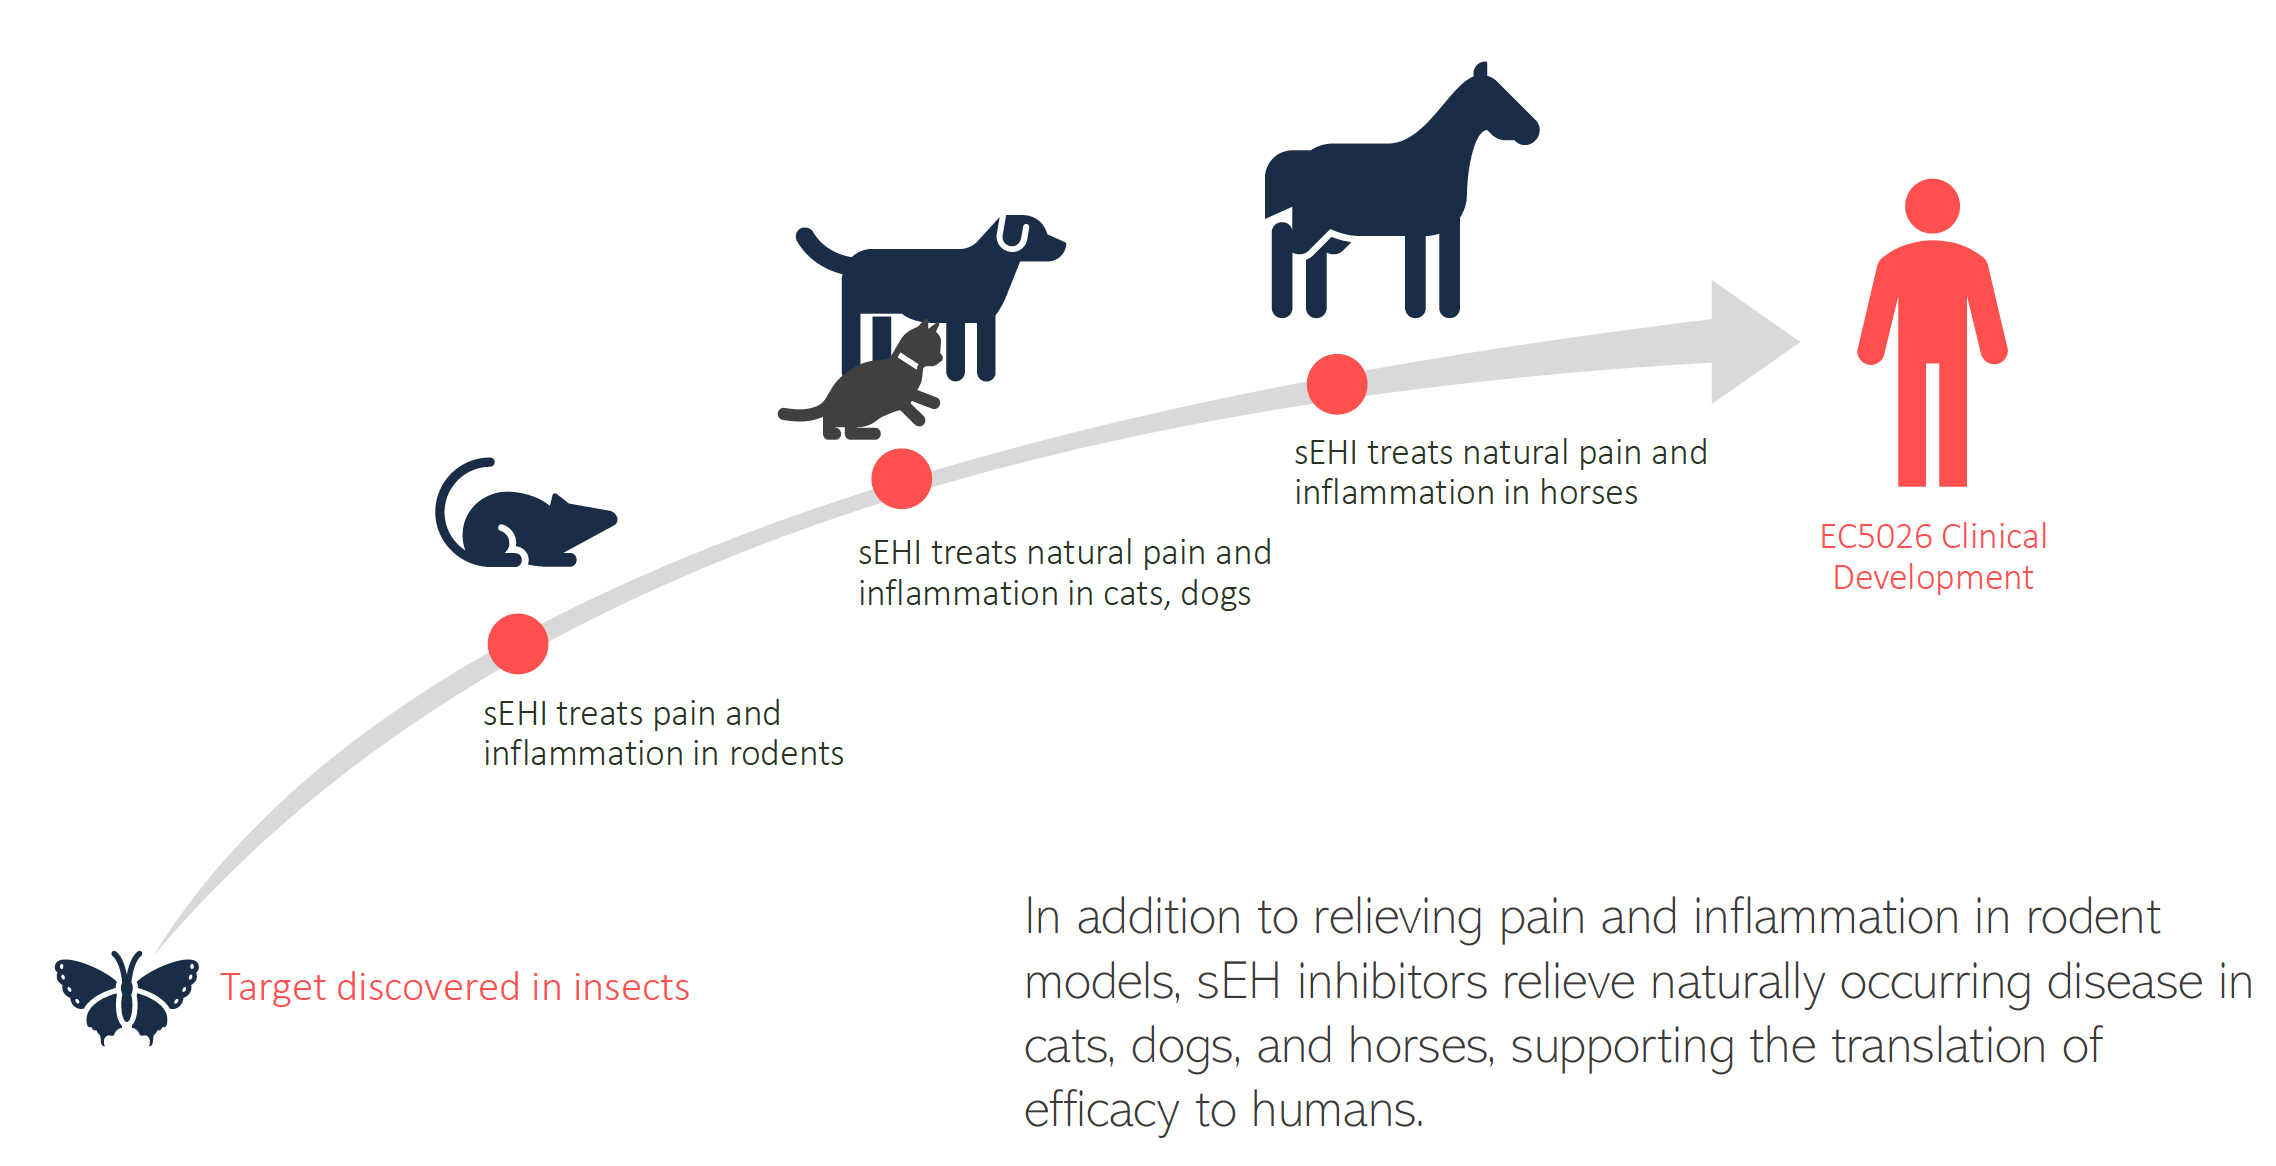 A pathway from a butterfly to a rodent, to companion animals, to horses and finally to humans. It shows the process of development of sEHI inhibitors for pain and inflammation